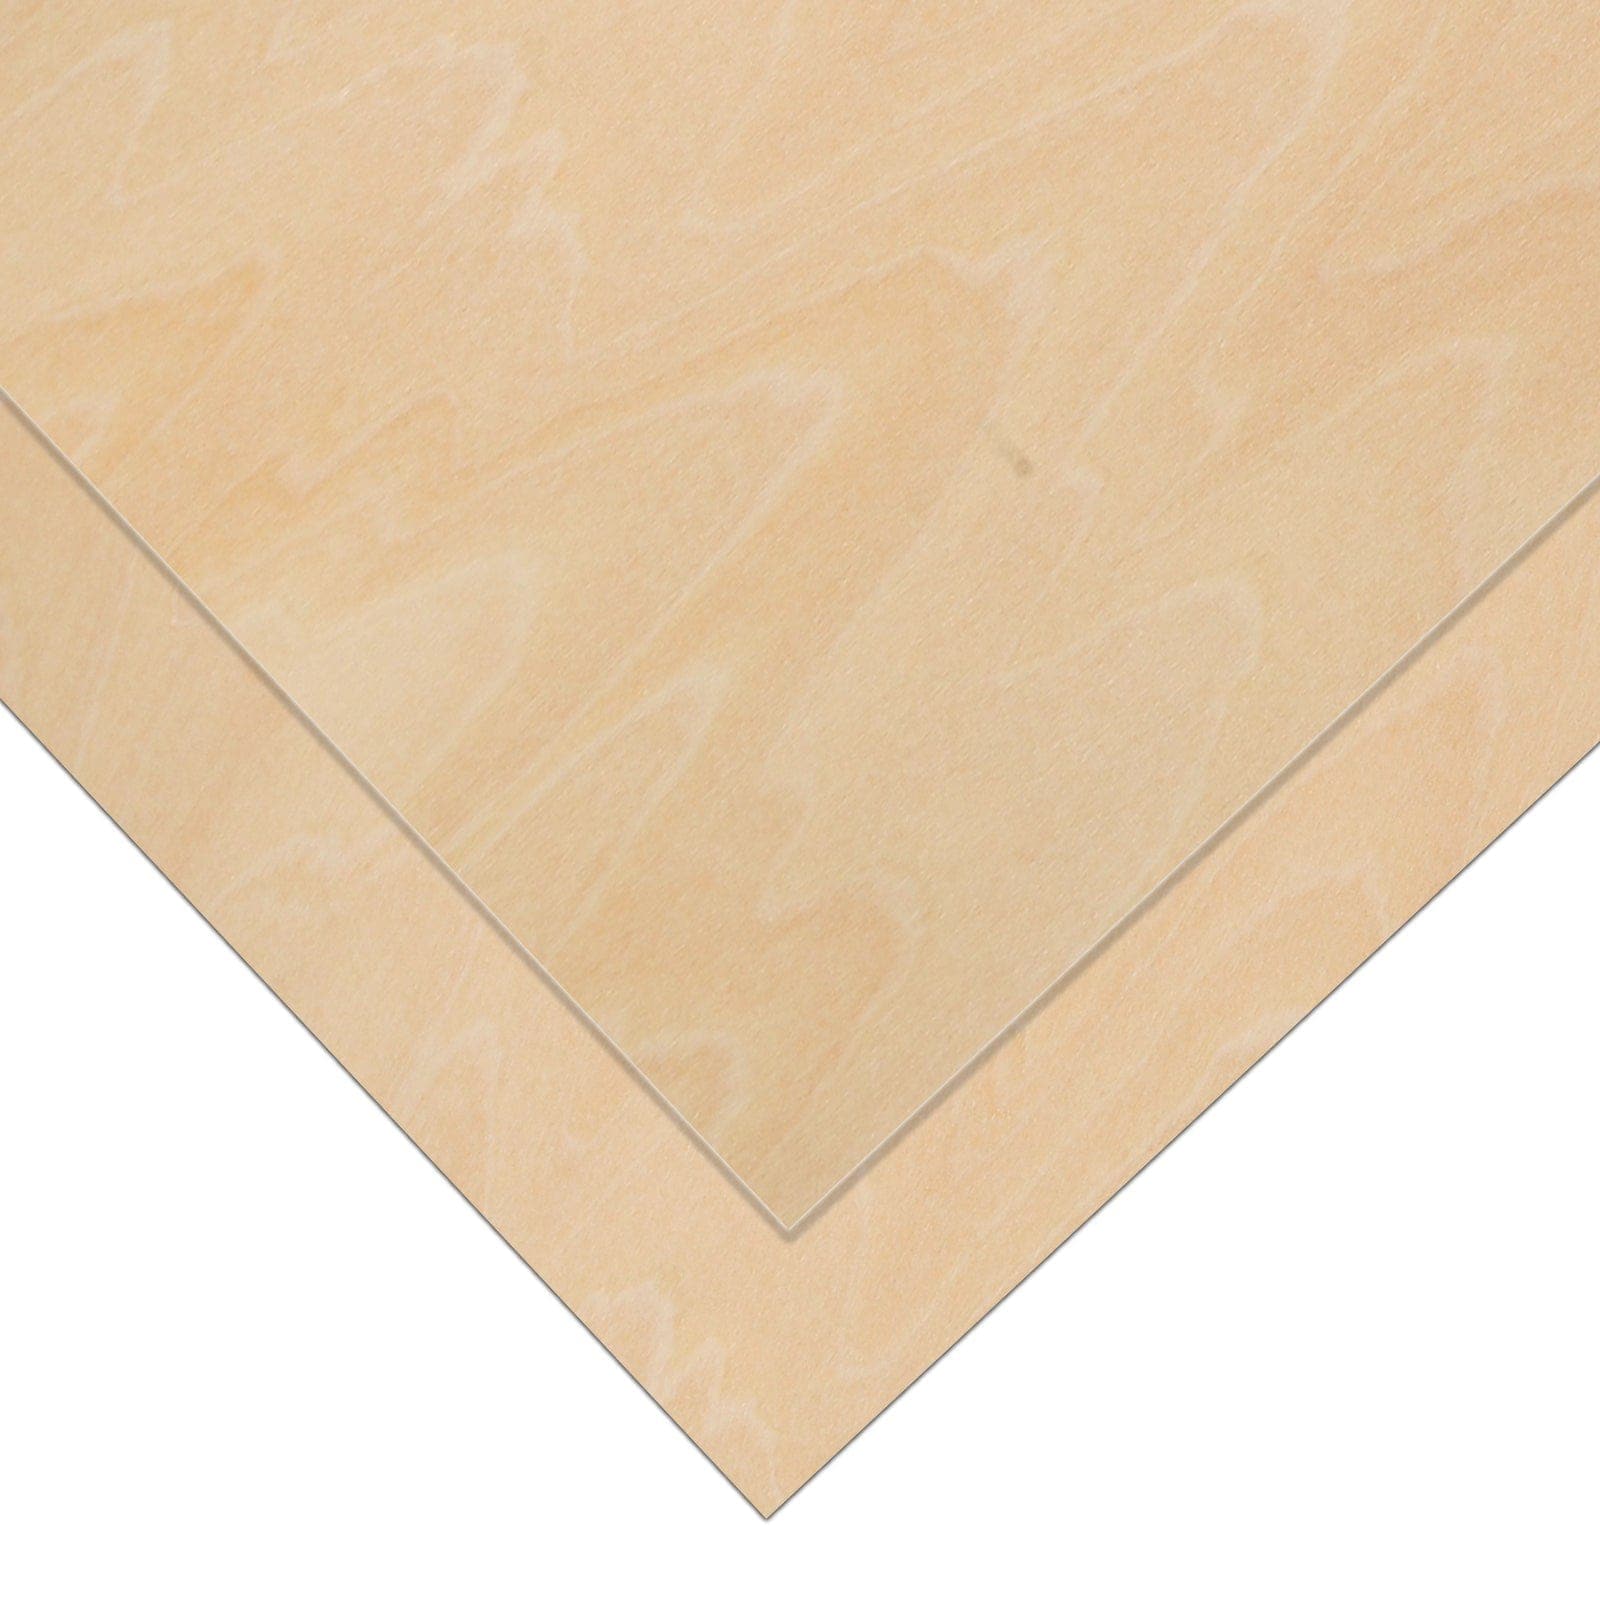 Basswood Plywood Board 900 x 300 x 3 mm: modeling, crafts & hobbies